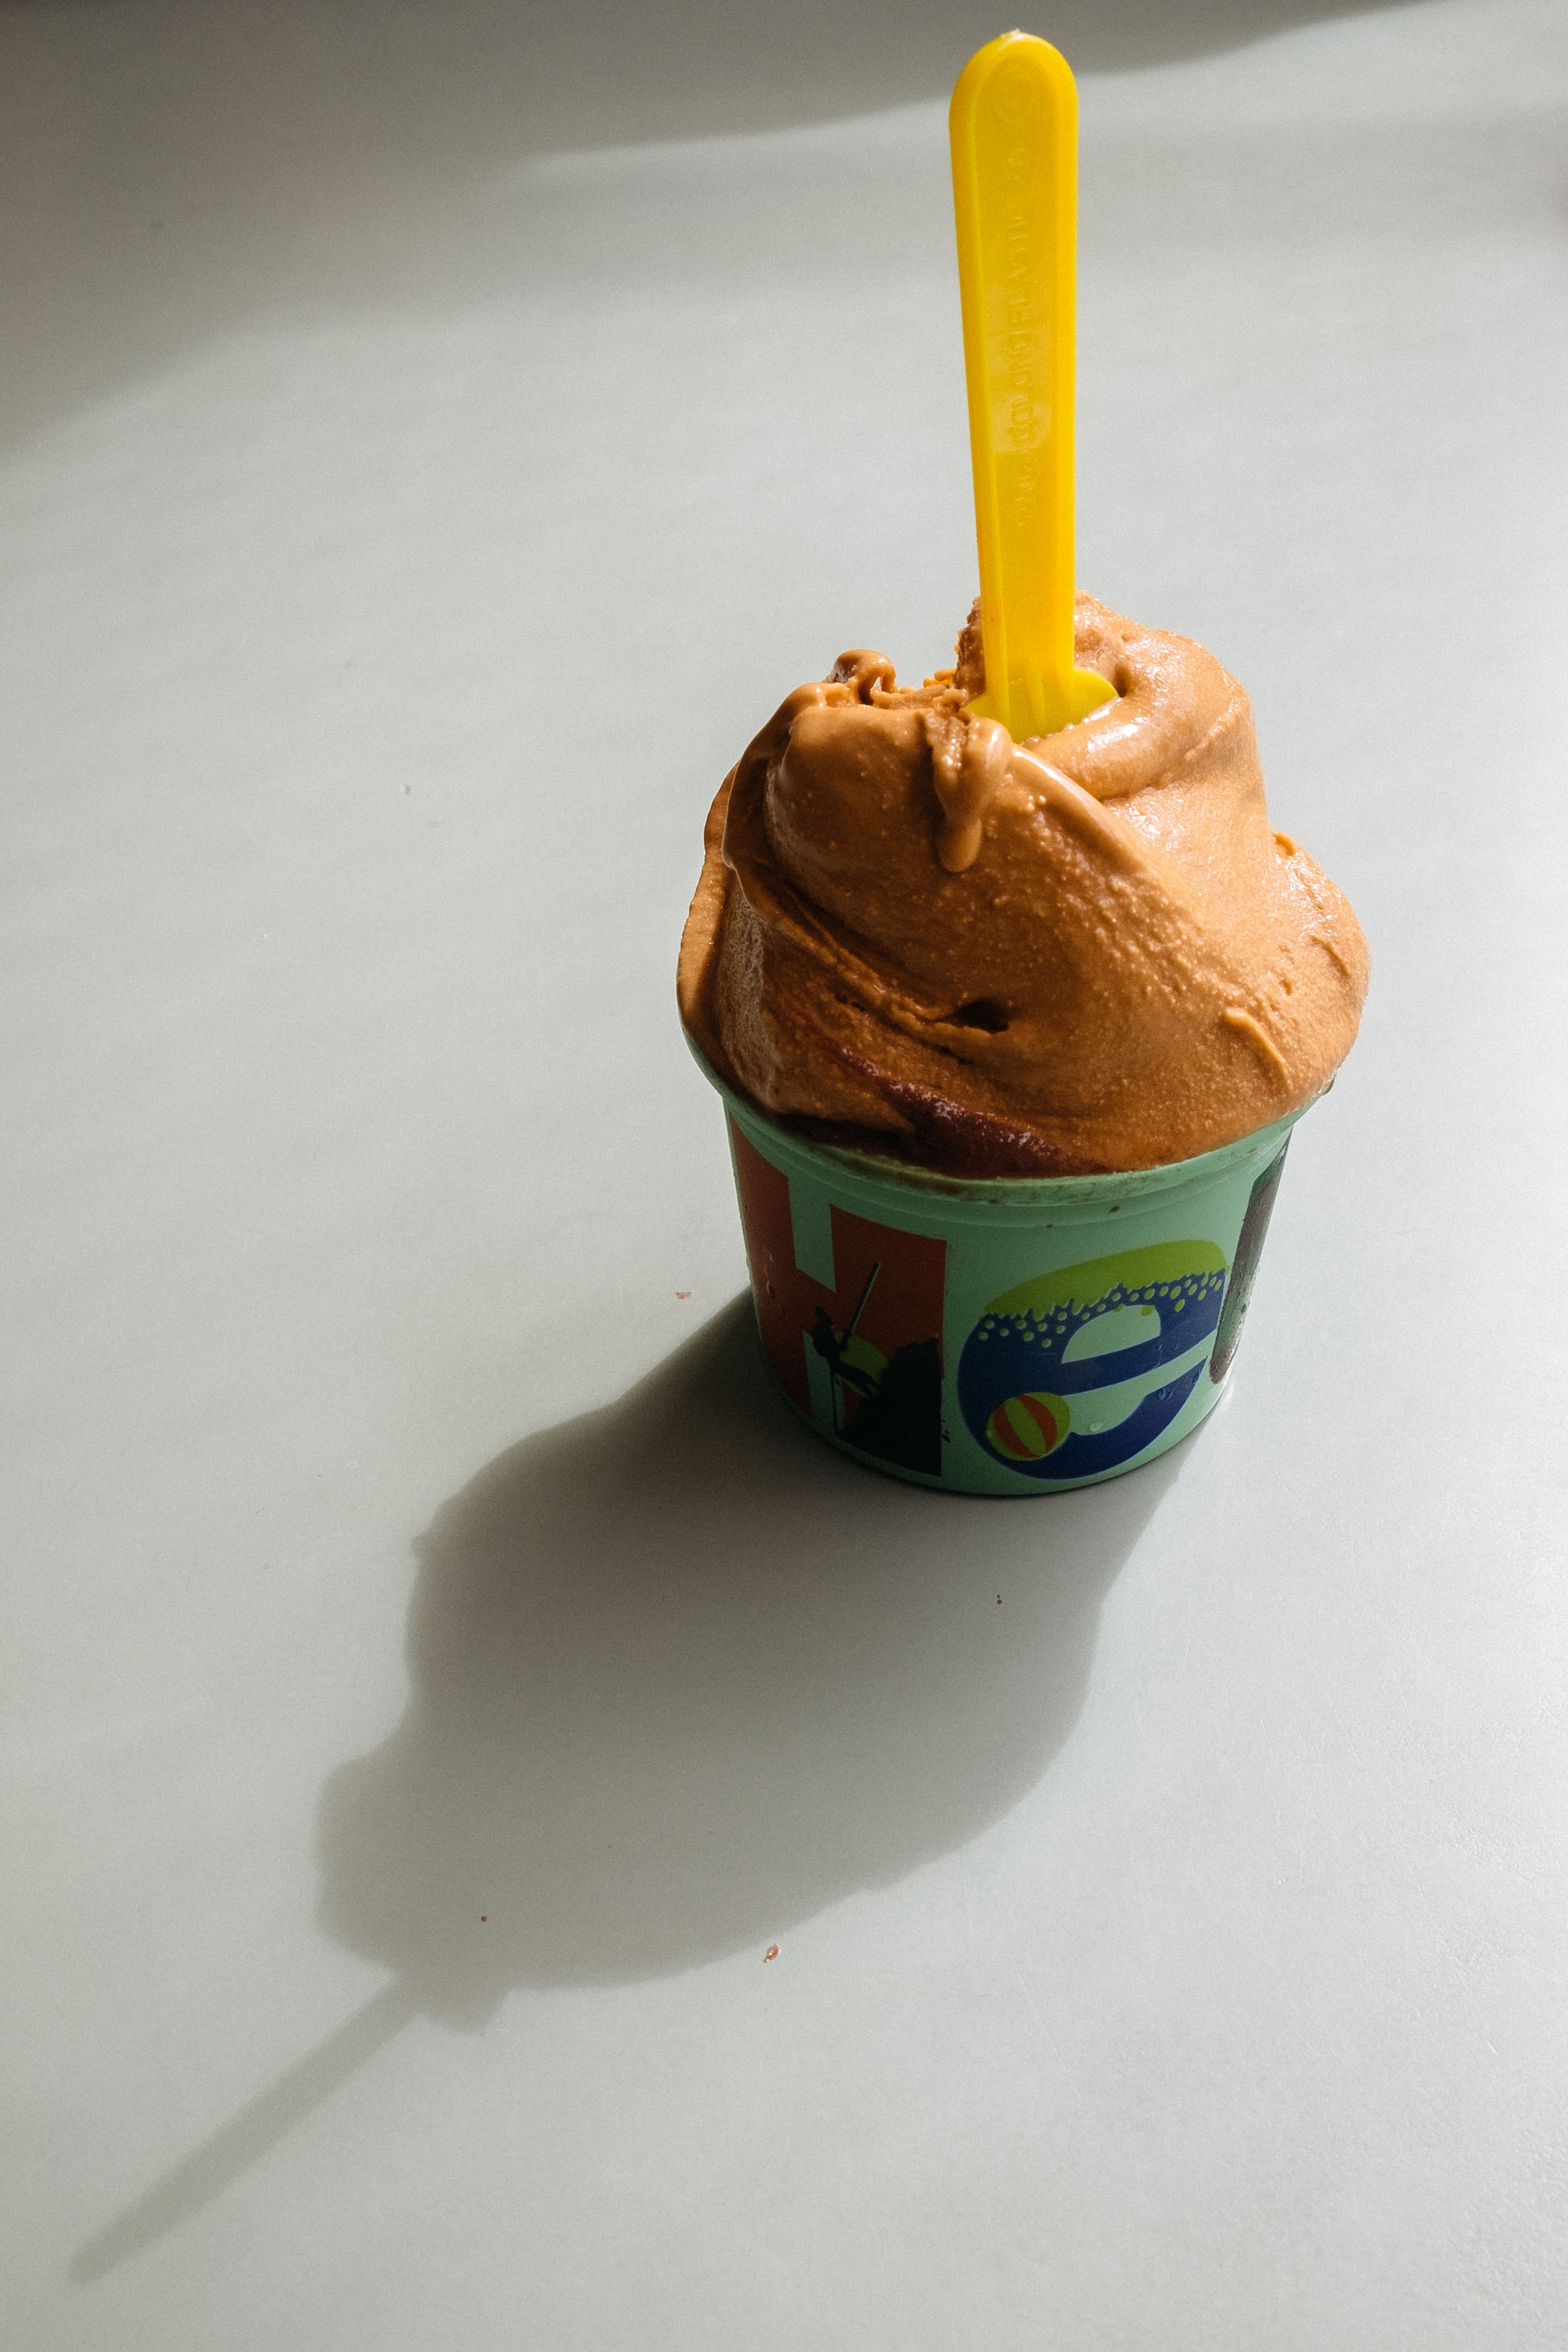 Patagonian Chocolate flavored ice cream from Ovejitas in El Calafate